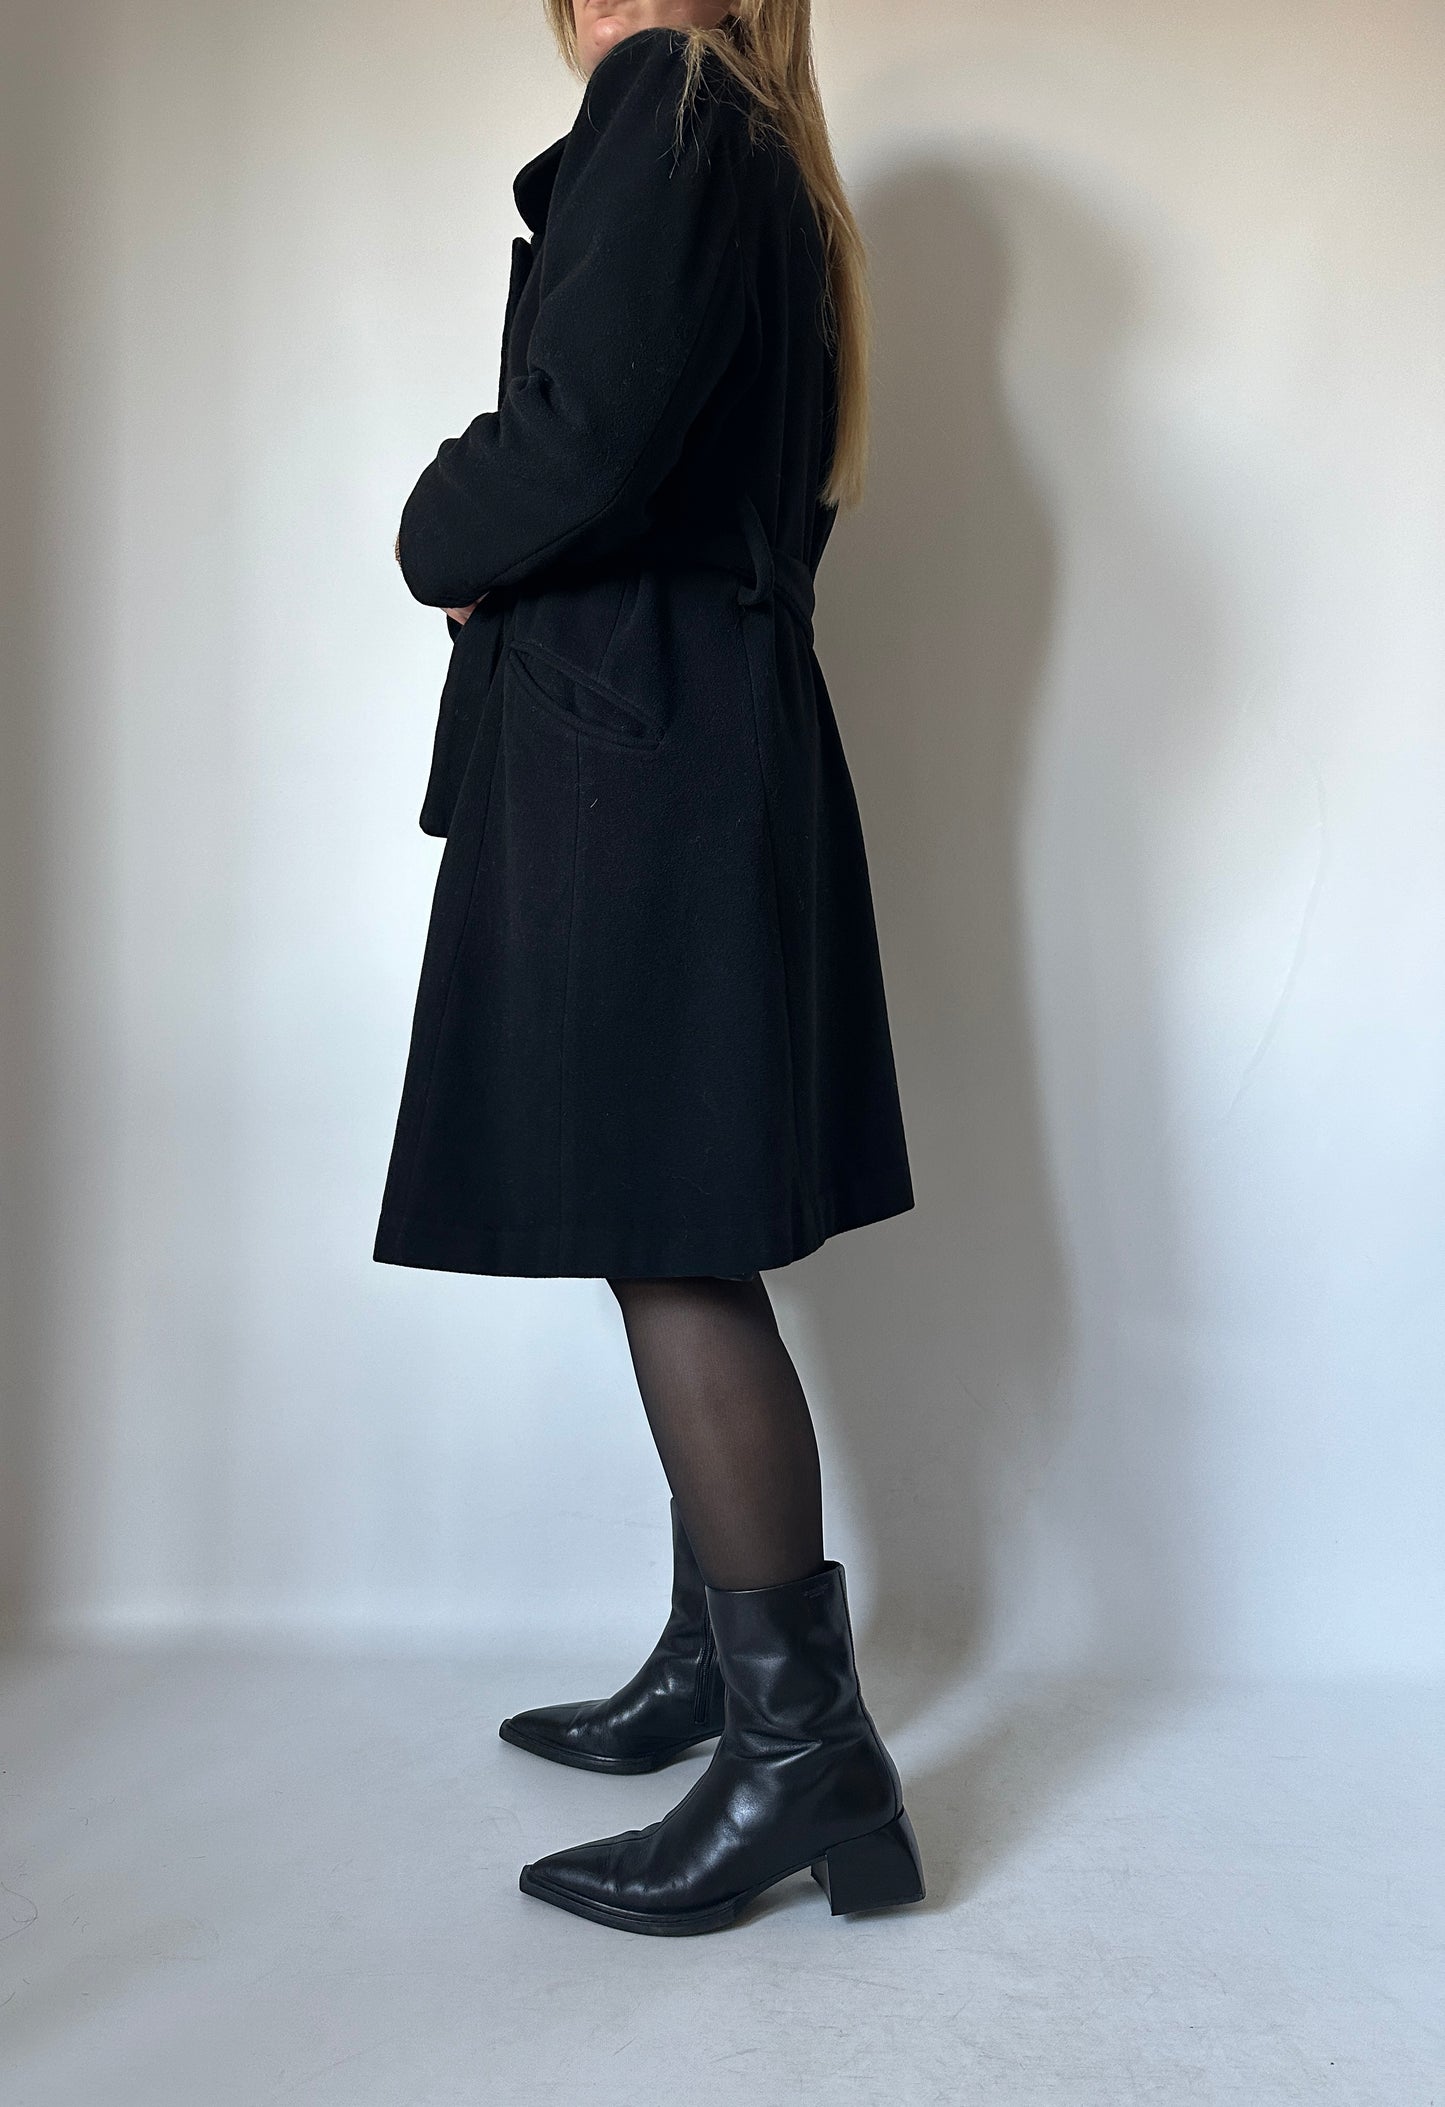 Cachemire and wool black coat